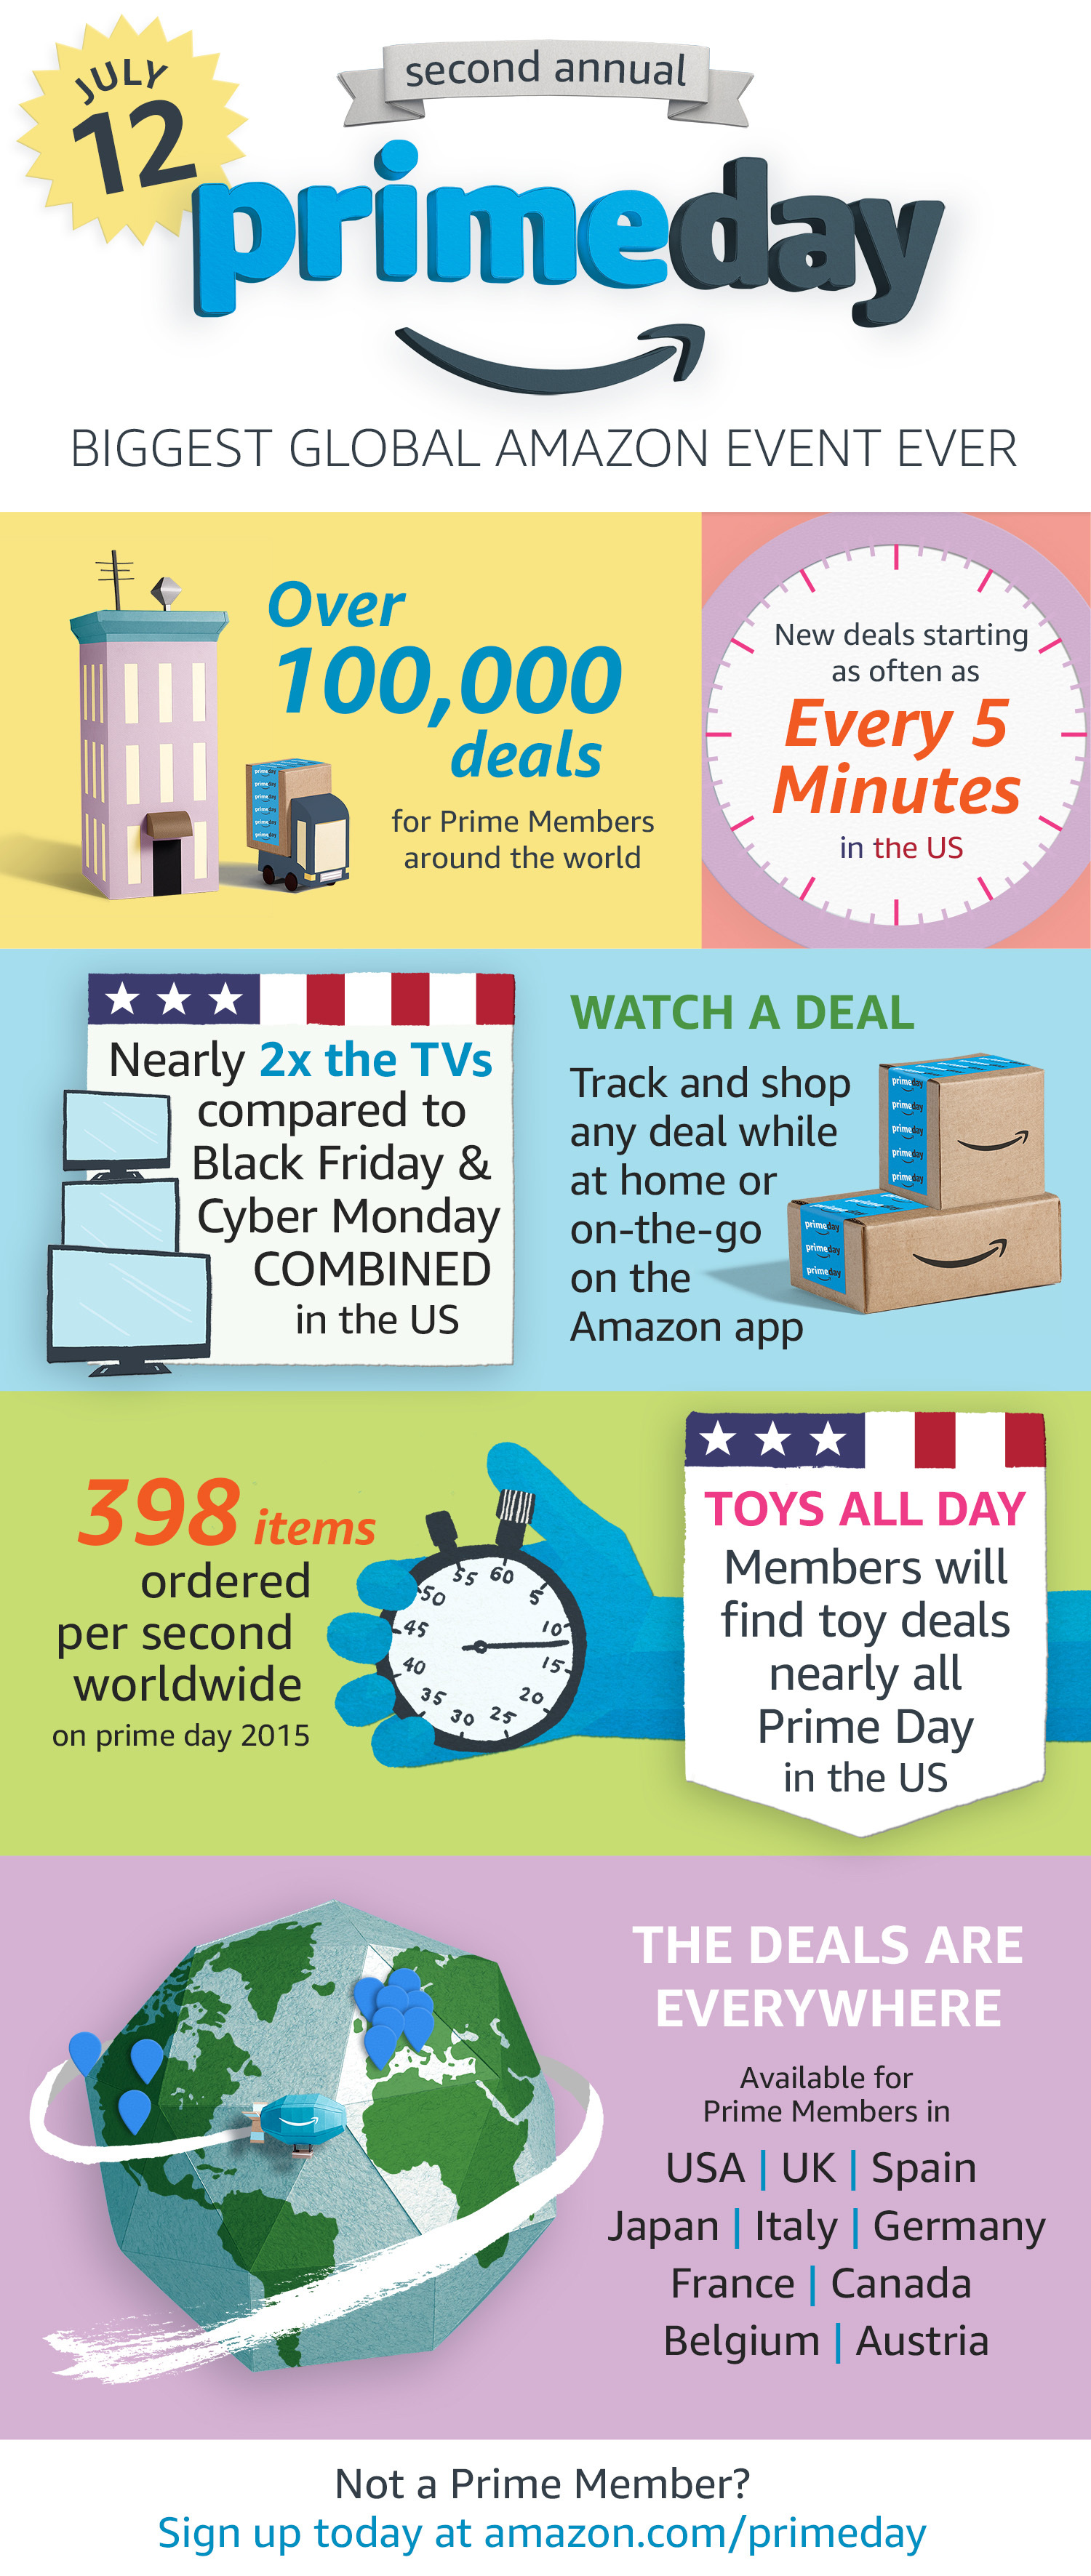 Amazon Announces Huge &#039;Prime Day&#039; Sale Event on July 12th With Over 100,000 Deals